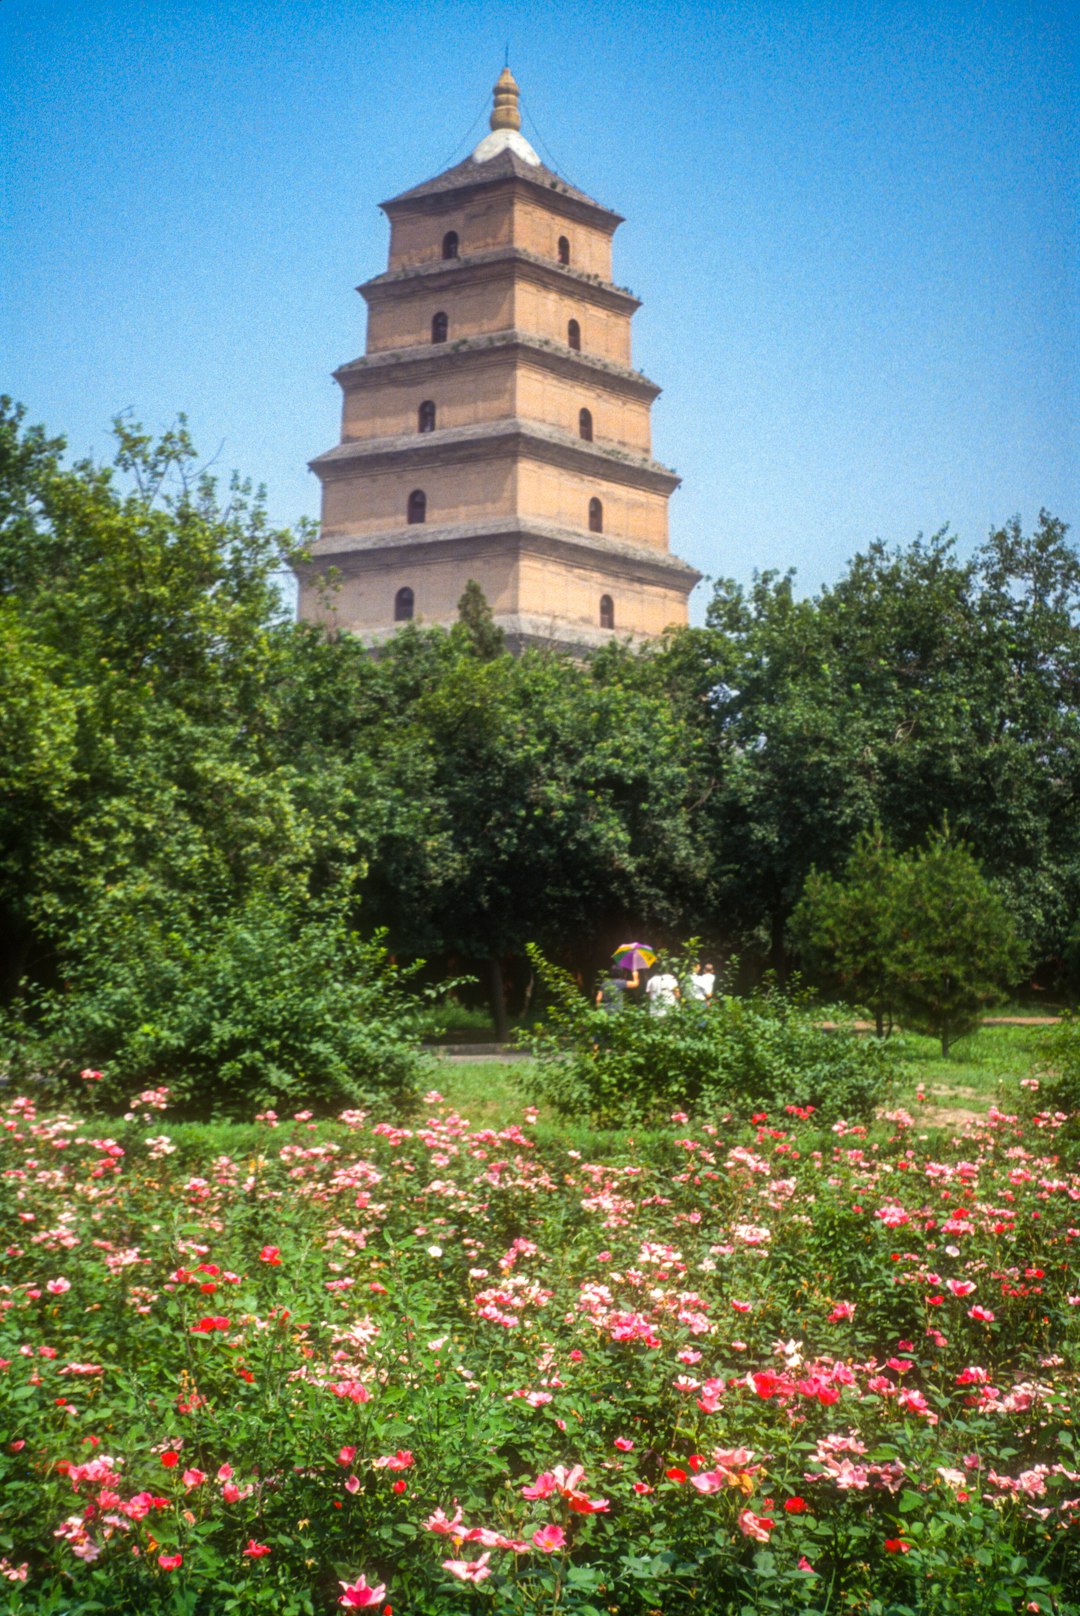 Travel Tips and Stories of Giant Wild Goose Pagoda in China